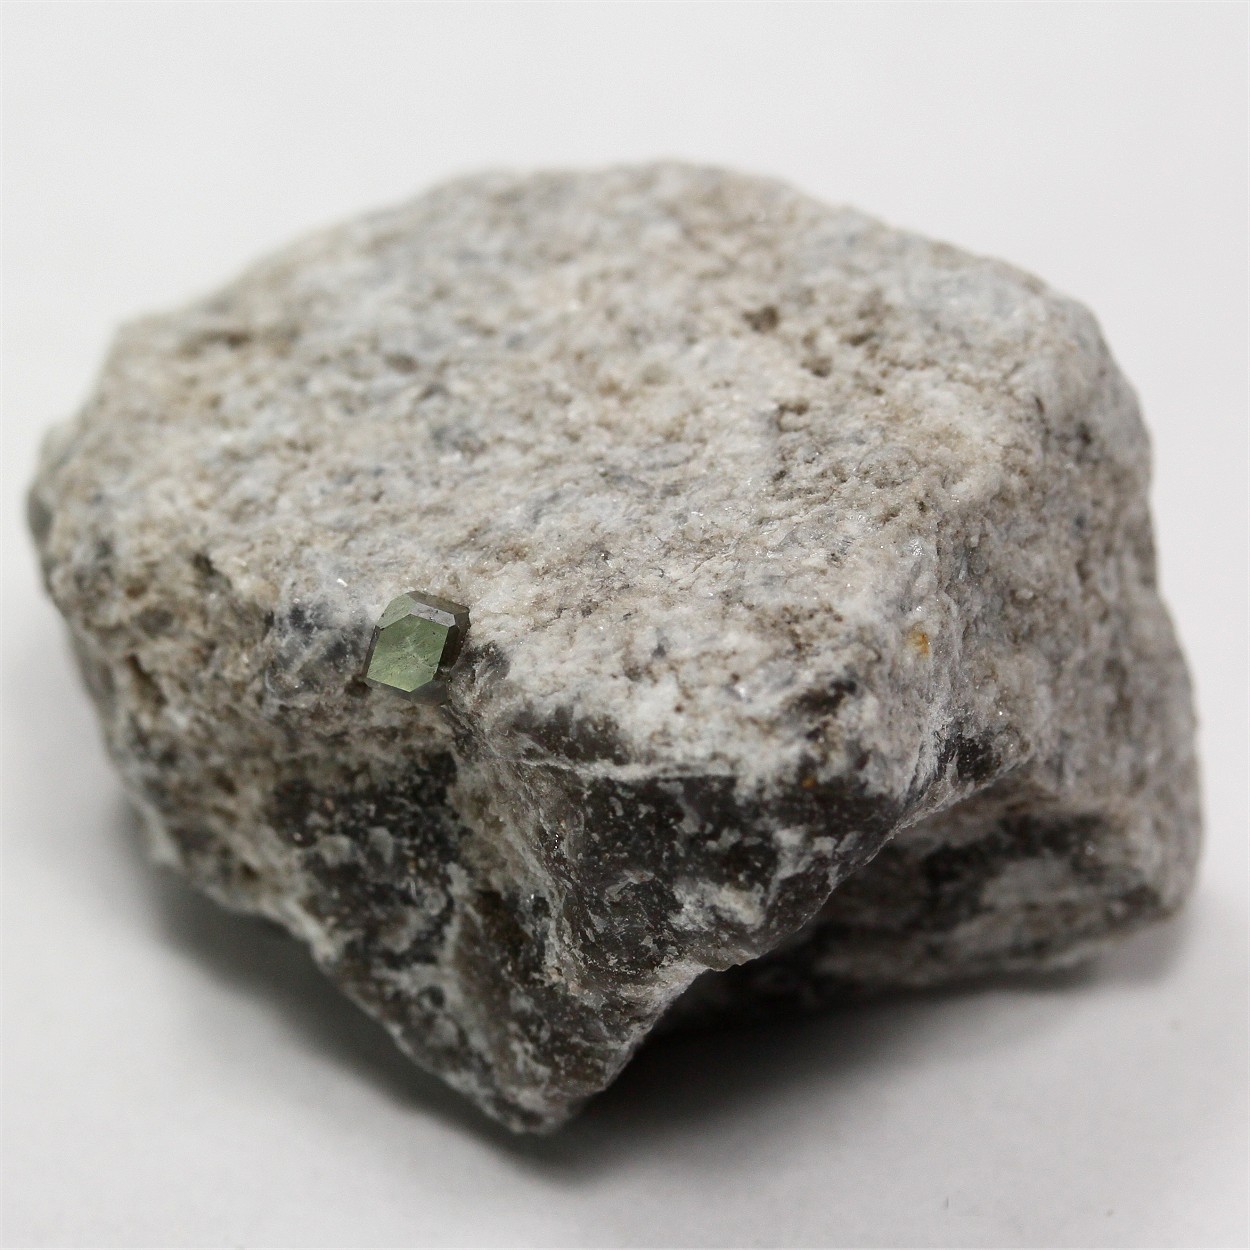 Boracite In Anhydrite